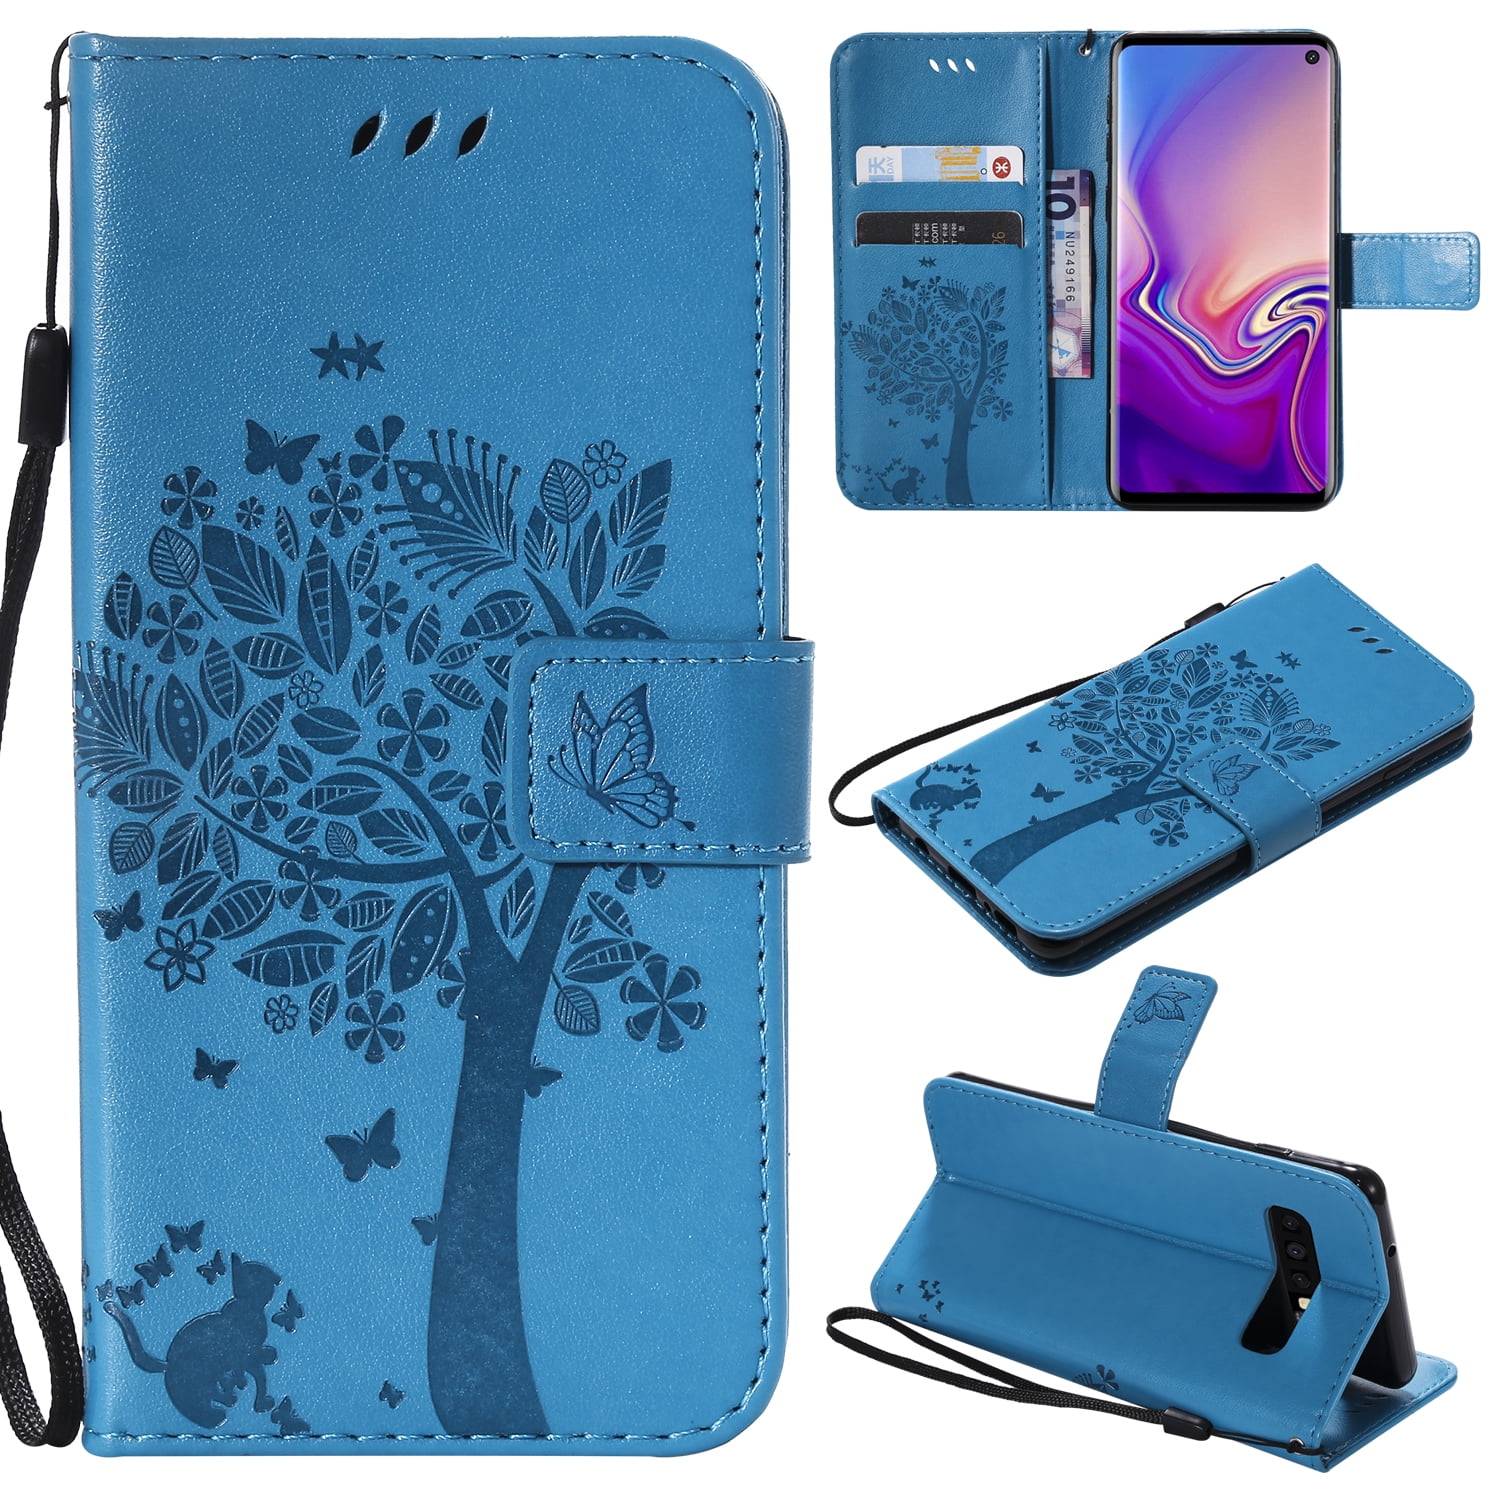 Samsung Galaxy S10 Case Shockproof 3D Premium PU Leather Flip Notebook Wallet Case with Magnetic Stand Card Holder Slot Folio TPU Bumper Protective Phone Case for Samsung Galaxy S10 Cat & Tiger